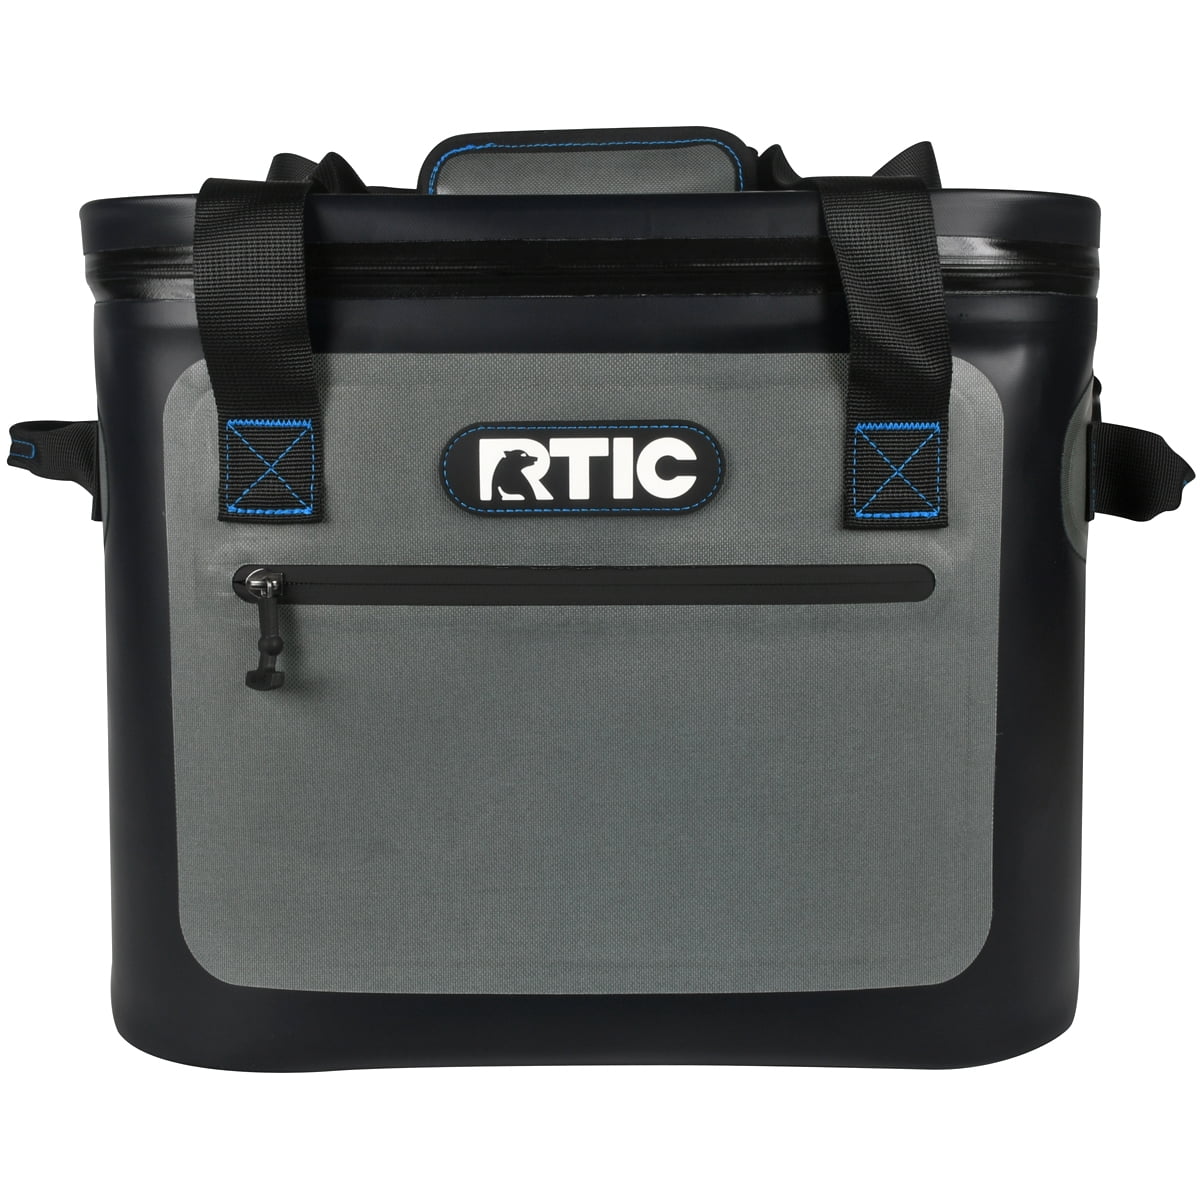 RTIC Soft Cooler 30 Can, Insulated Bag Portable Ice Chest Box for Lunch,  Beach, 7445019817851